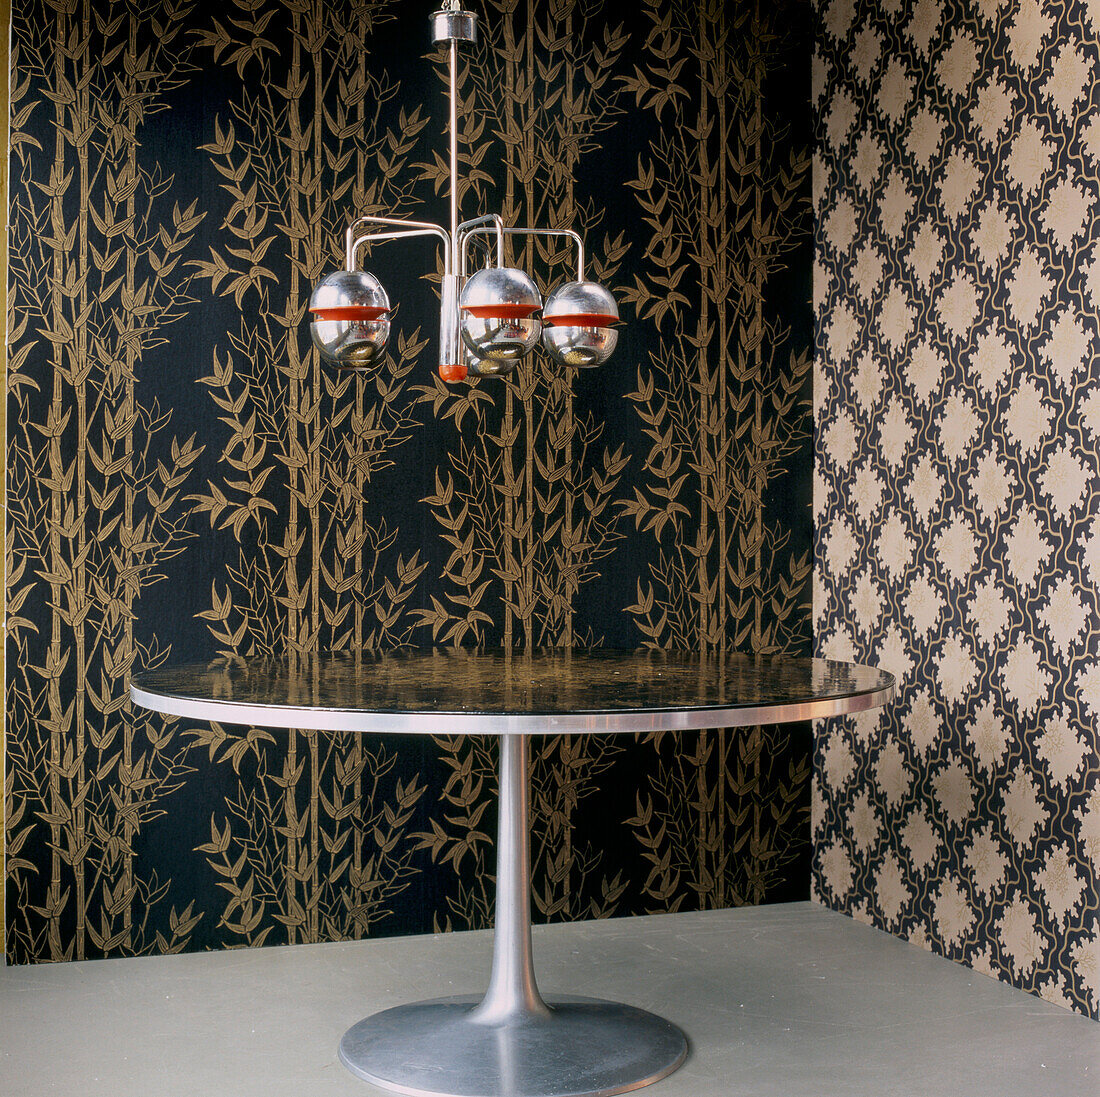 Heavily patterned wallpaper in a dining room with round metallic table and retro chandelier